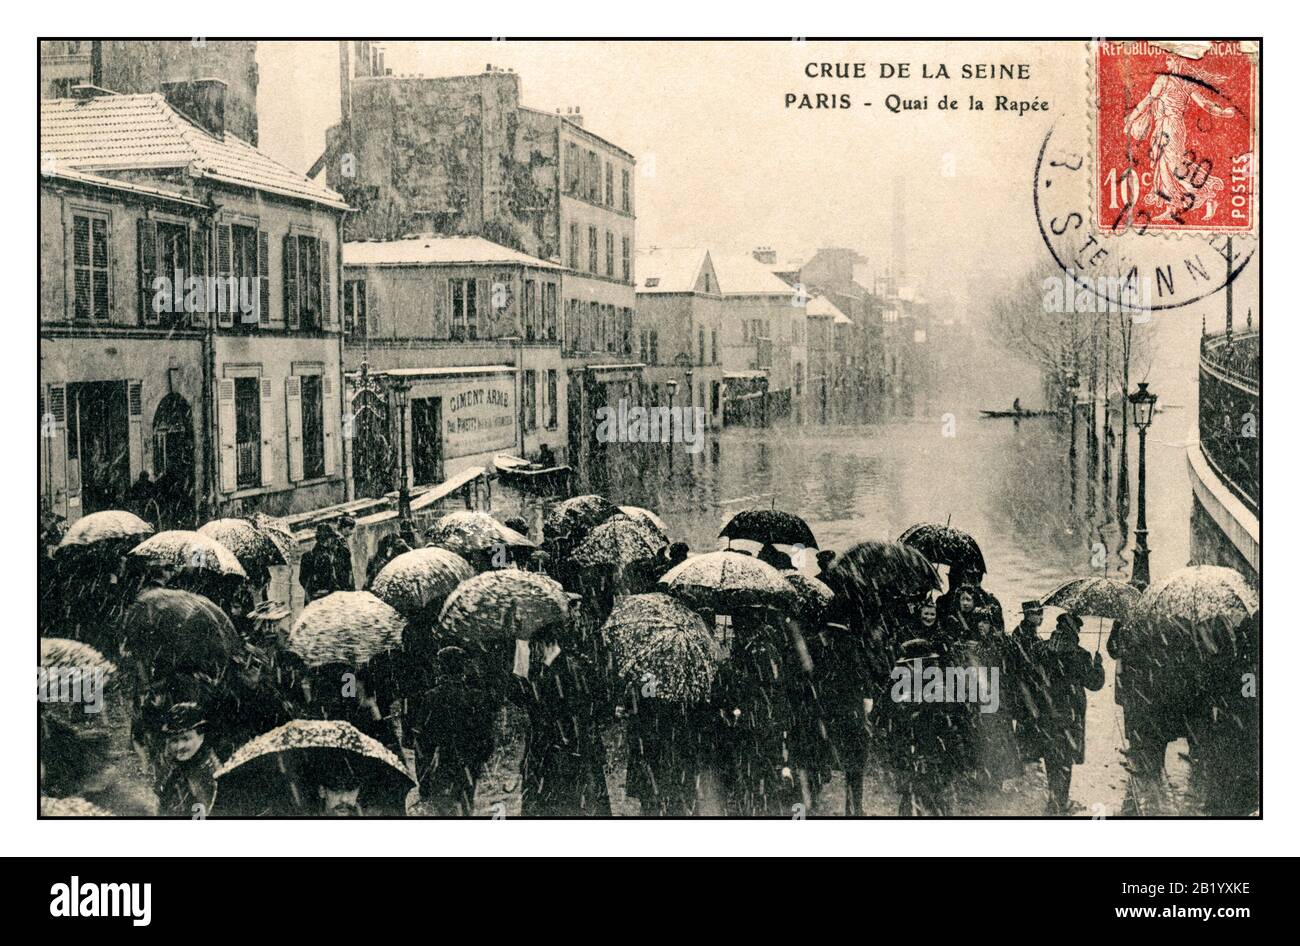 GREAT FLOOD 1910 ARCHIVE PARIS FRANCE Vintage historic great flood French 1900’s stylish postcard of one of the great natural catastrophes in Parisian and French history: the Great Flood of January 1910, the likes of which Paris had not seen since 1658. Torrential rain and snow floods most of Paris France Stock Photo